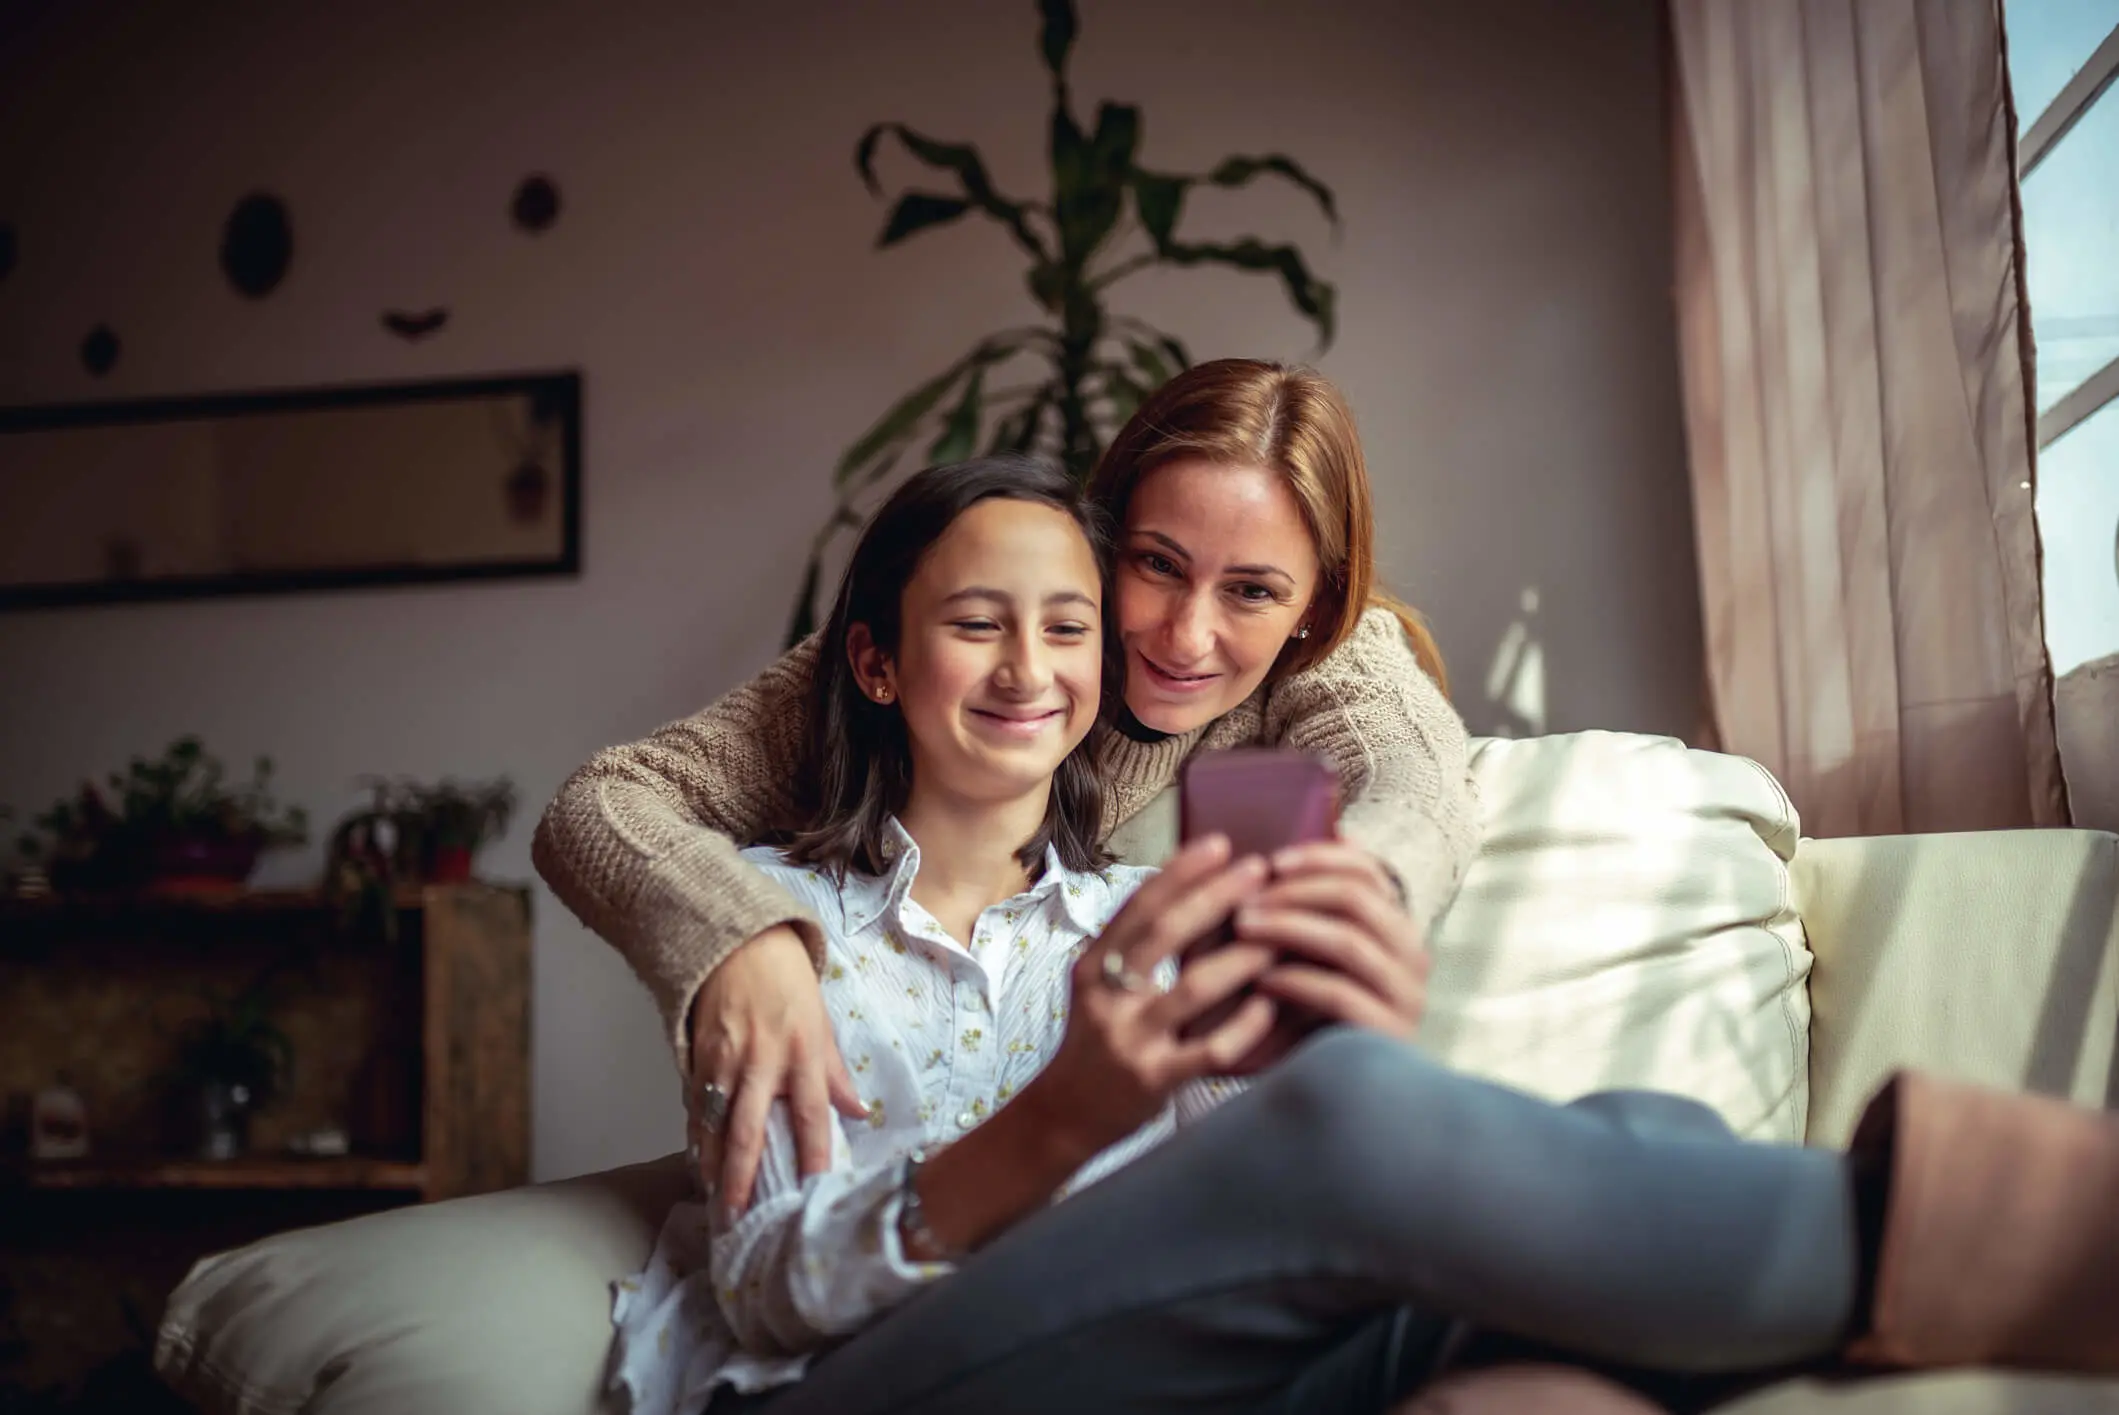 mom and daughter looking at her smartphone smiling